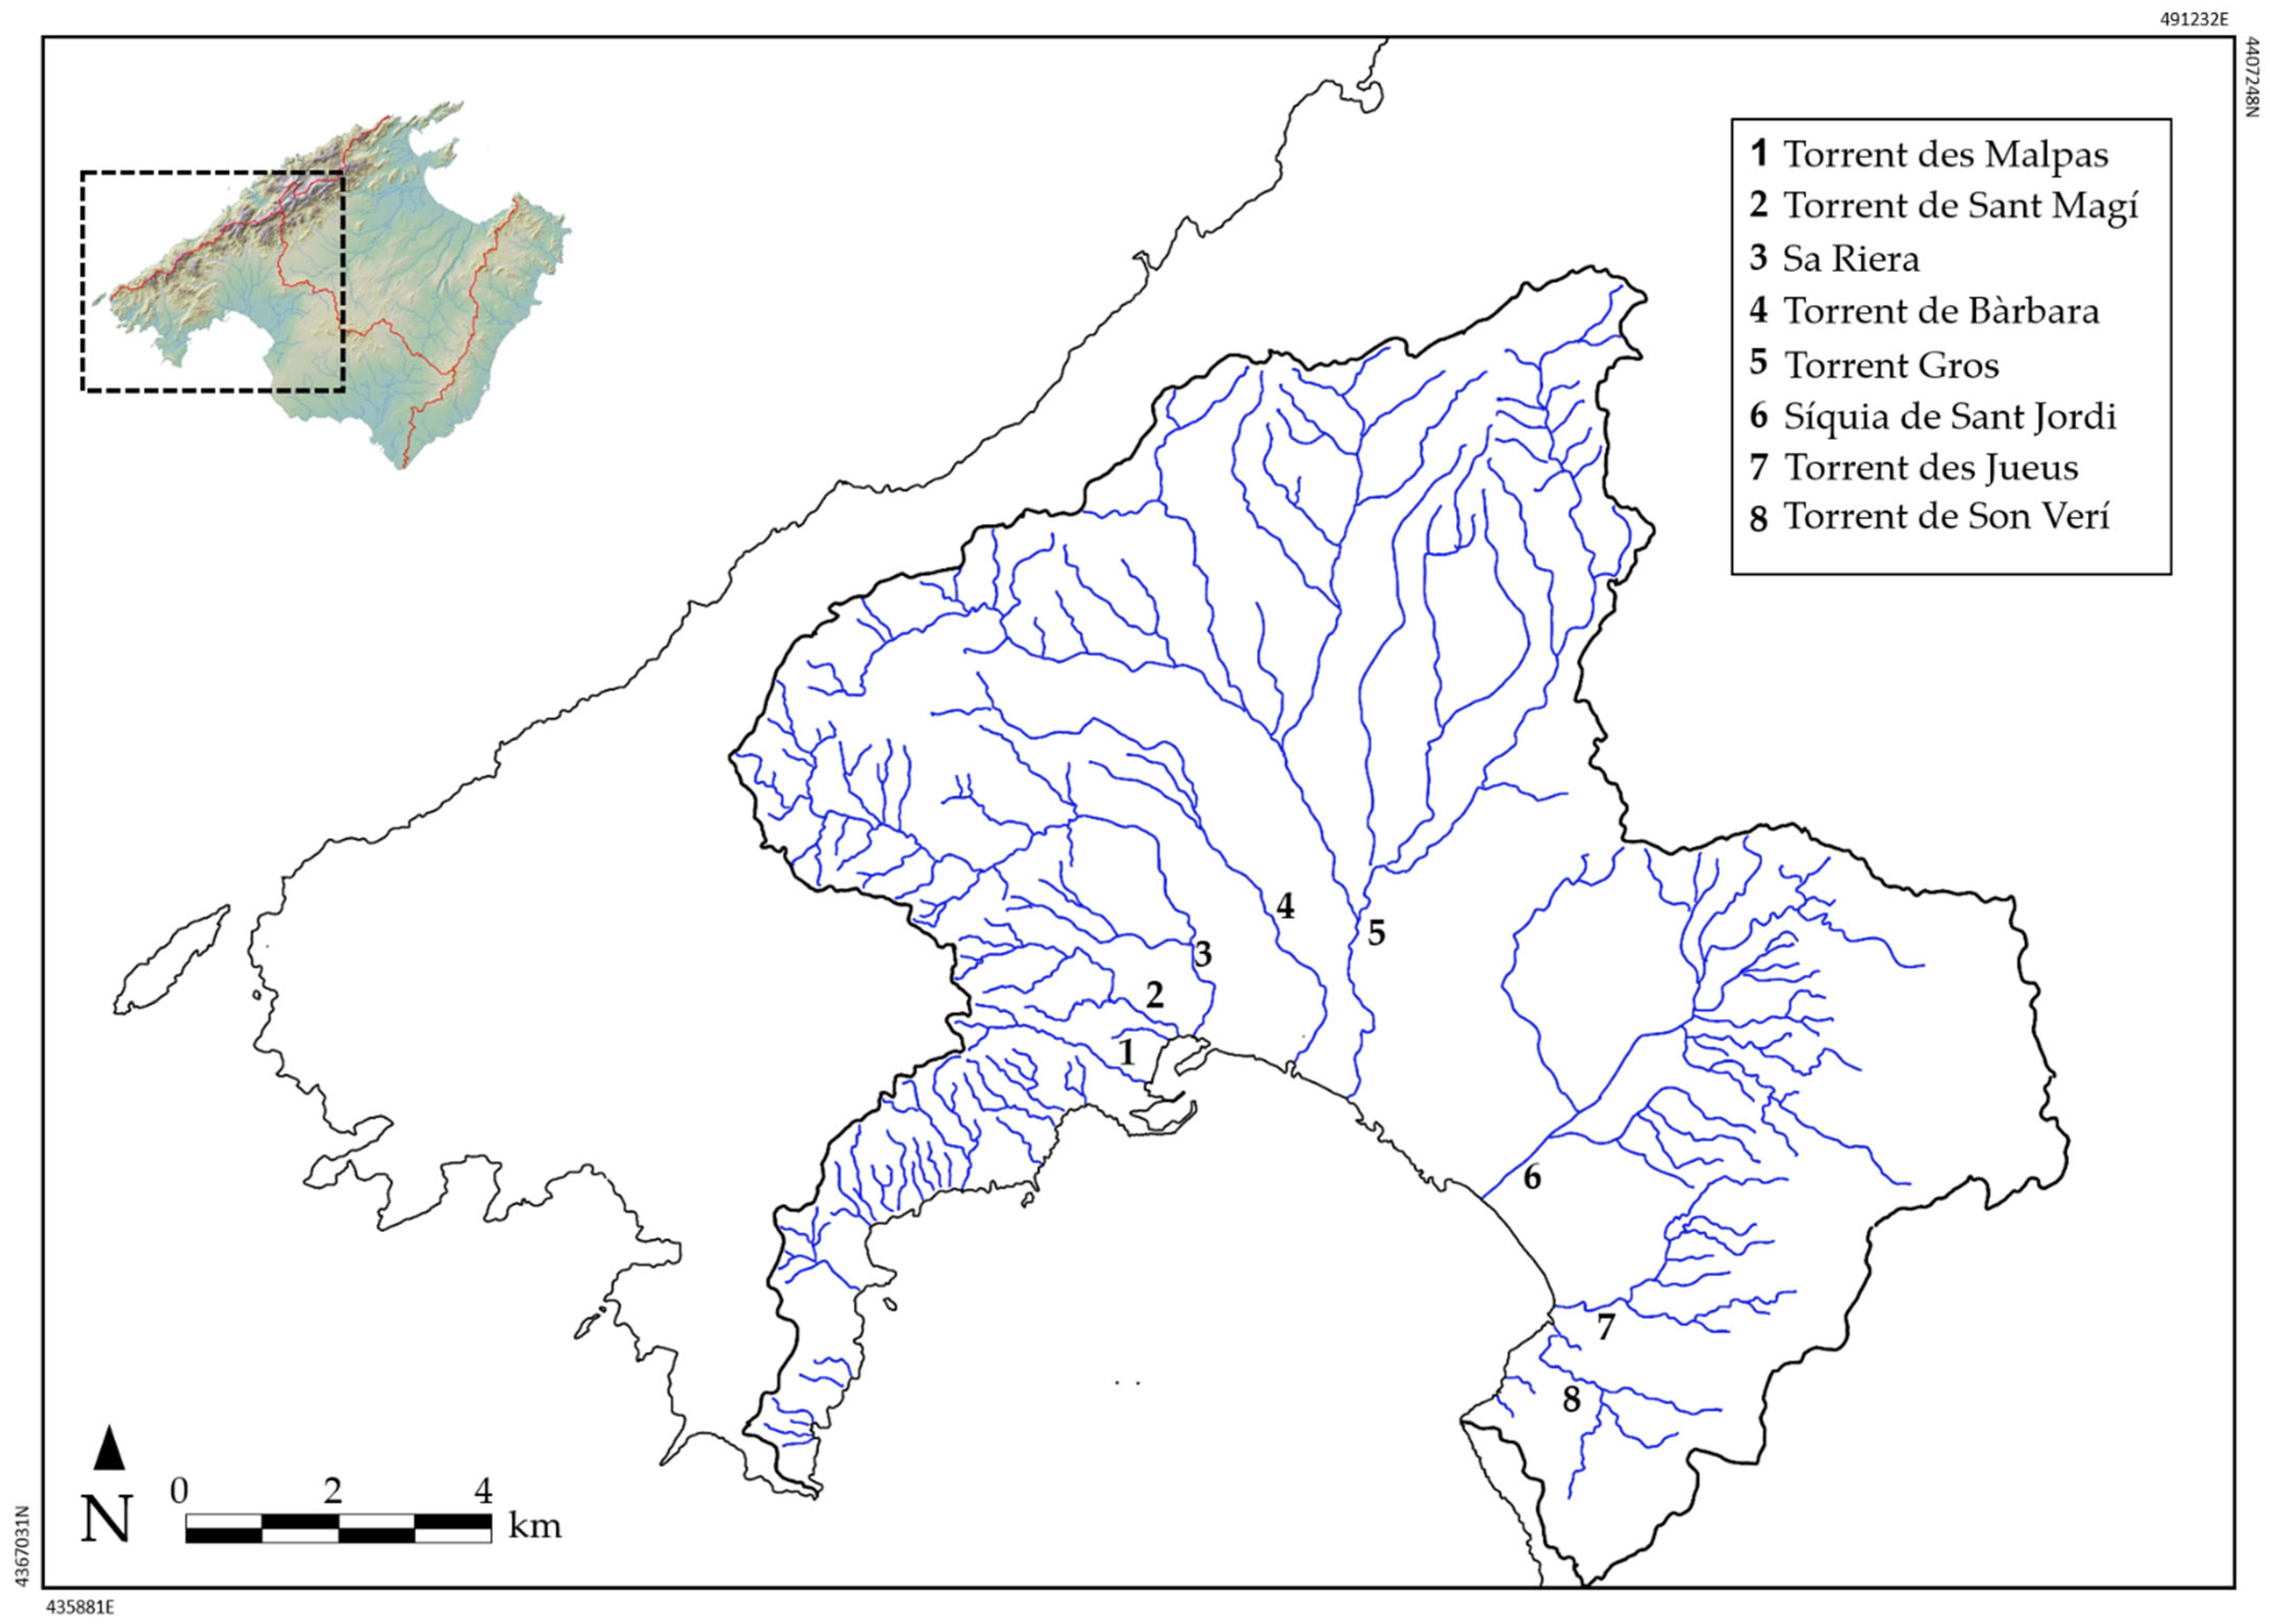 Earth | Free Full-Text | Mapping of the Flood Distribution in an Urban  Environment: The Case of Palma (Mallorca, Spain) in the First Two Decades  of the 21st Century